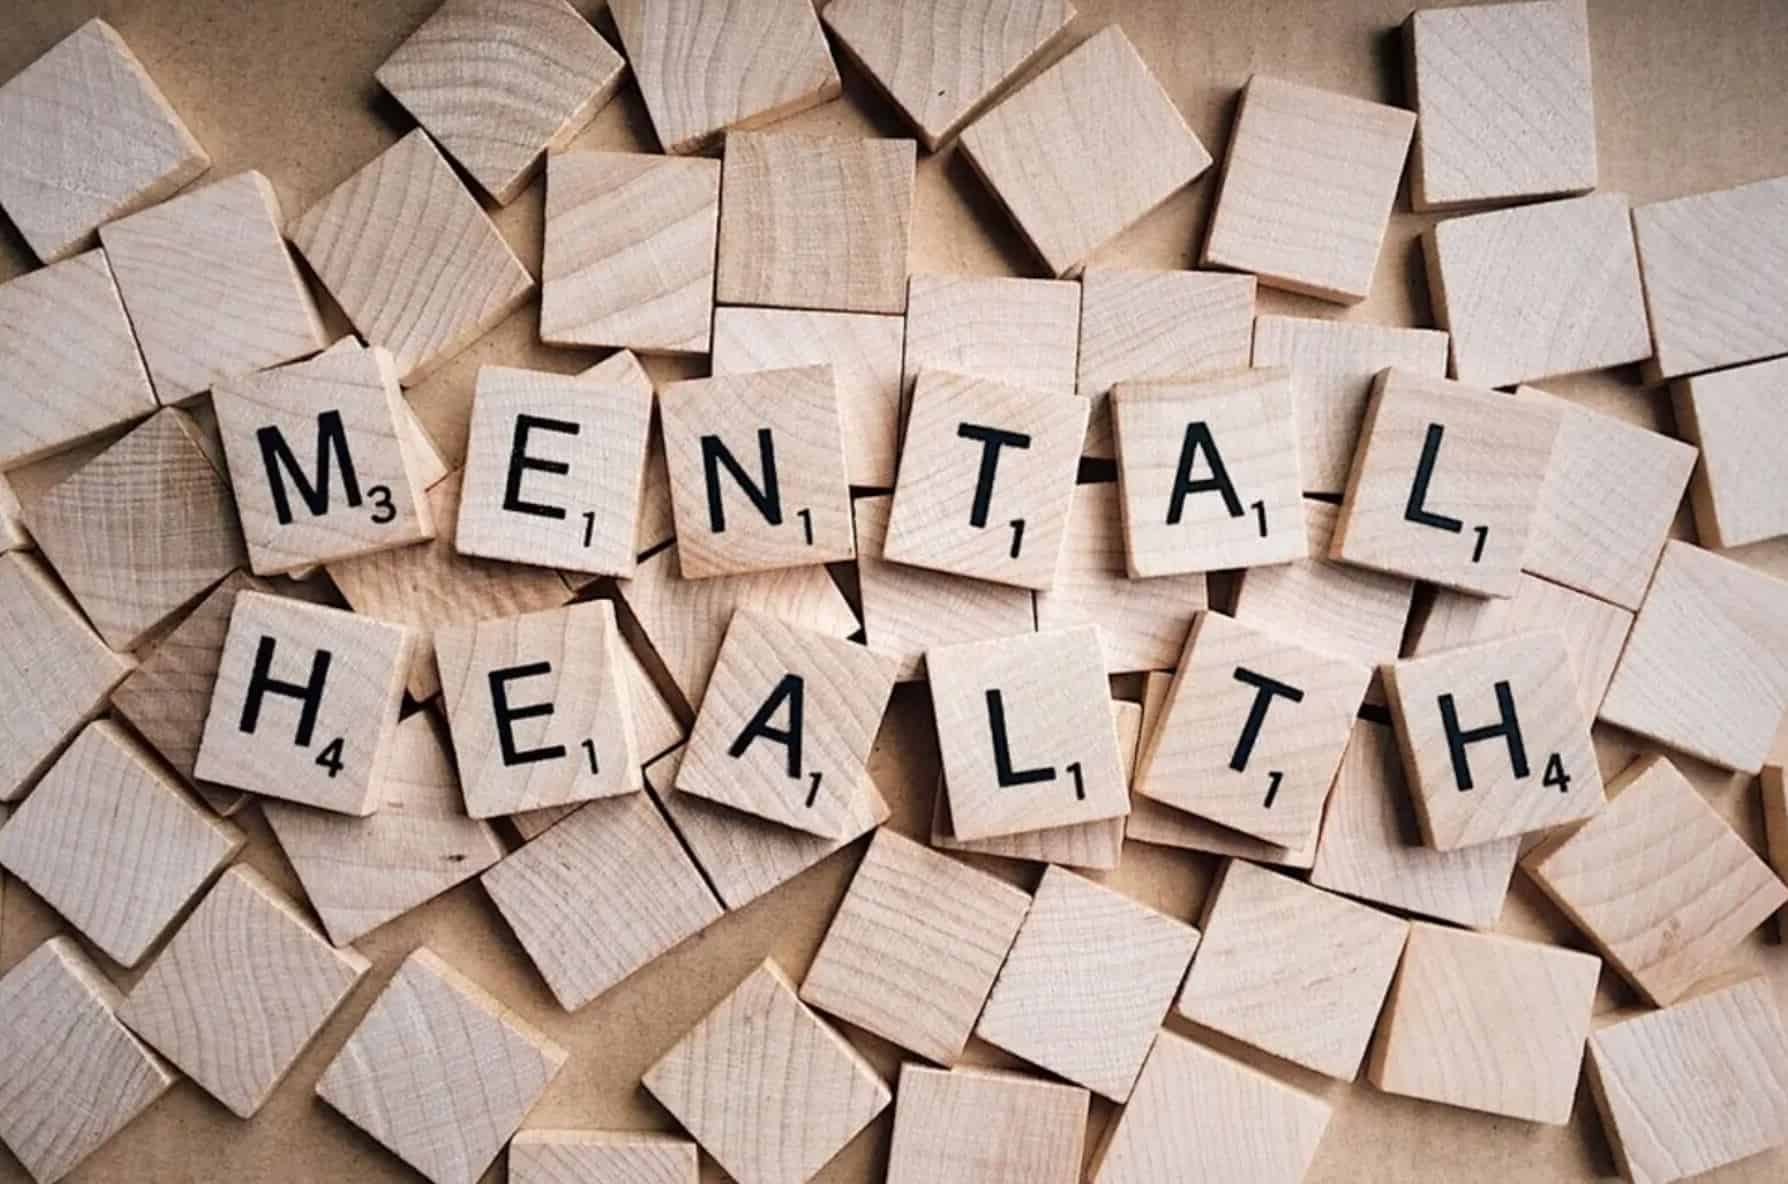 Mental Health spelled out with wooden scrabble tiles.